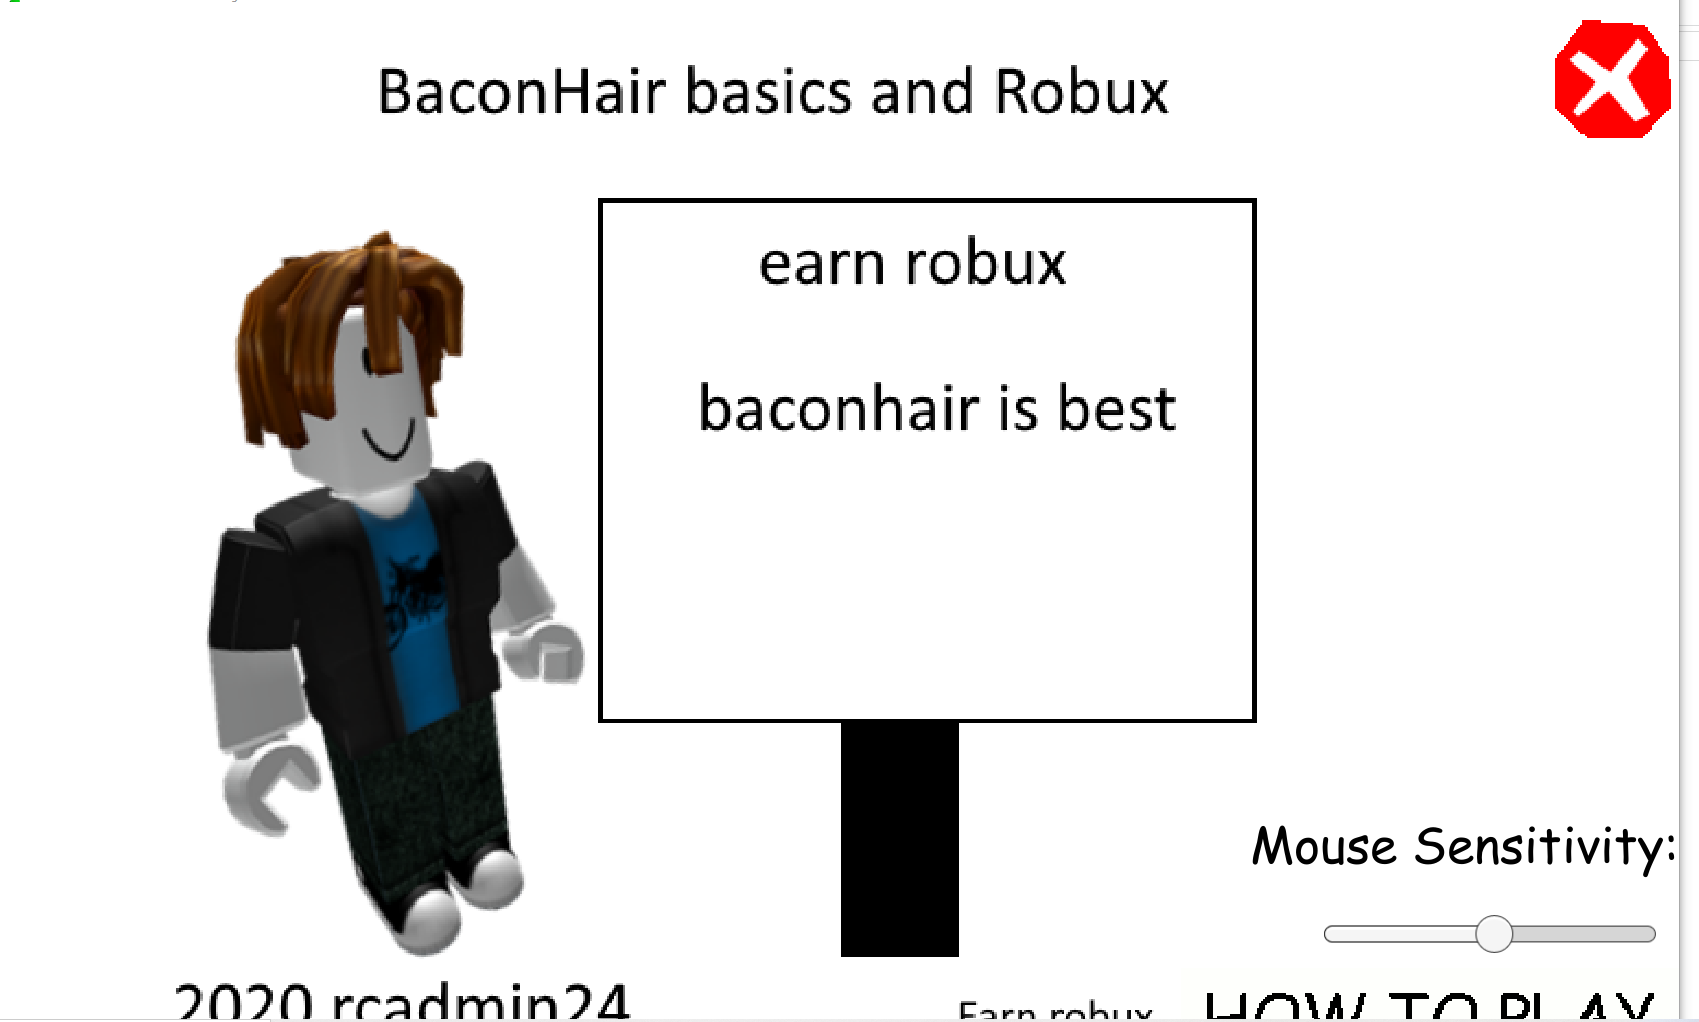 BACONHAIR BASICS AND ROBUX by adminer24